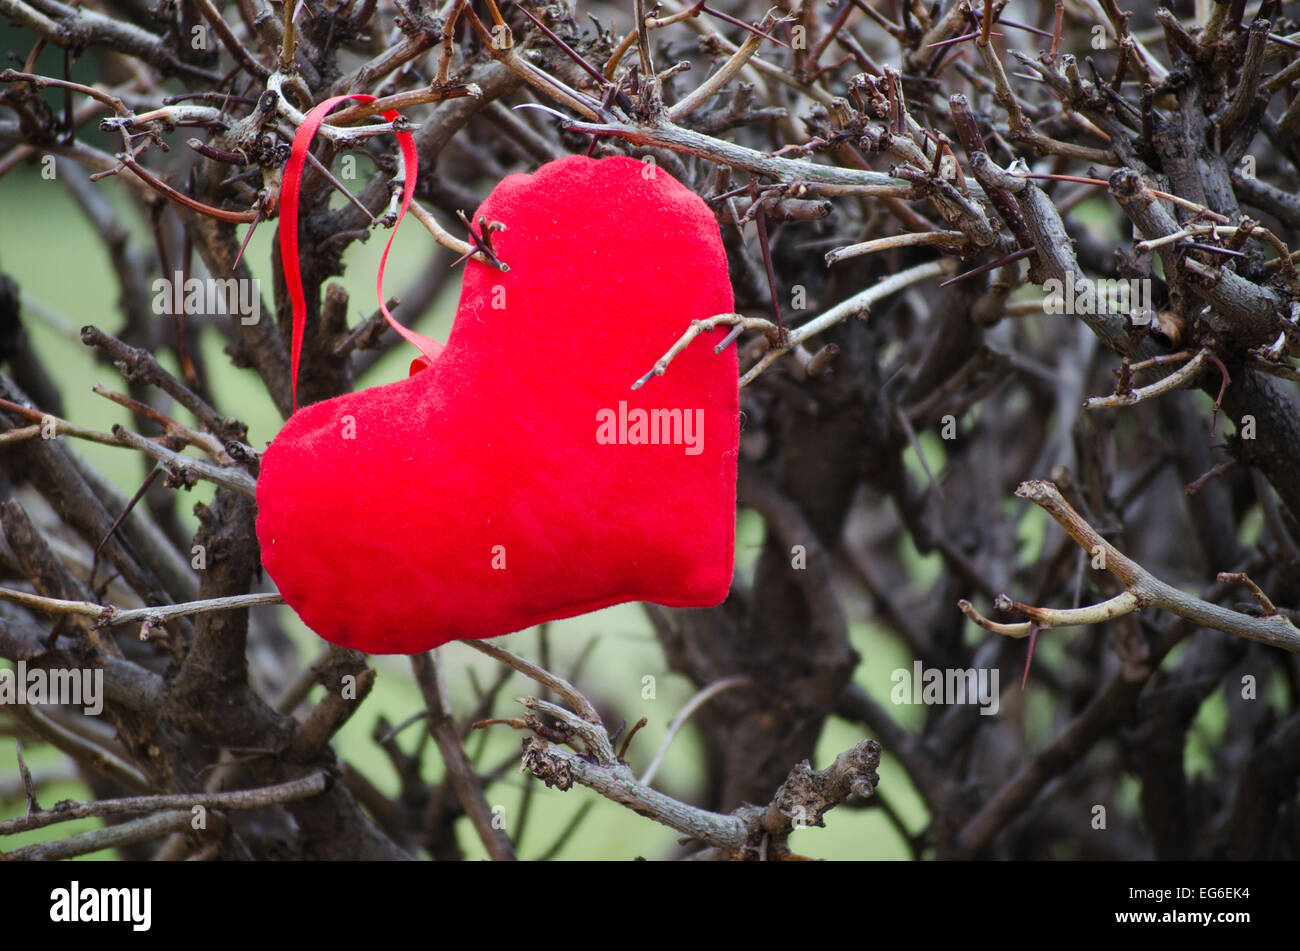 Red heart among thorns in the park Stock Photo